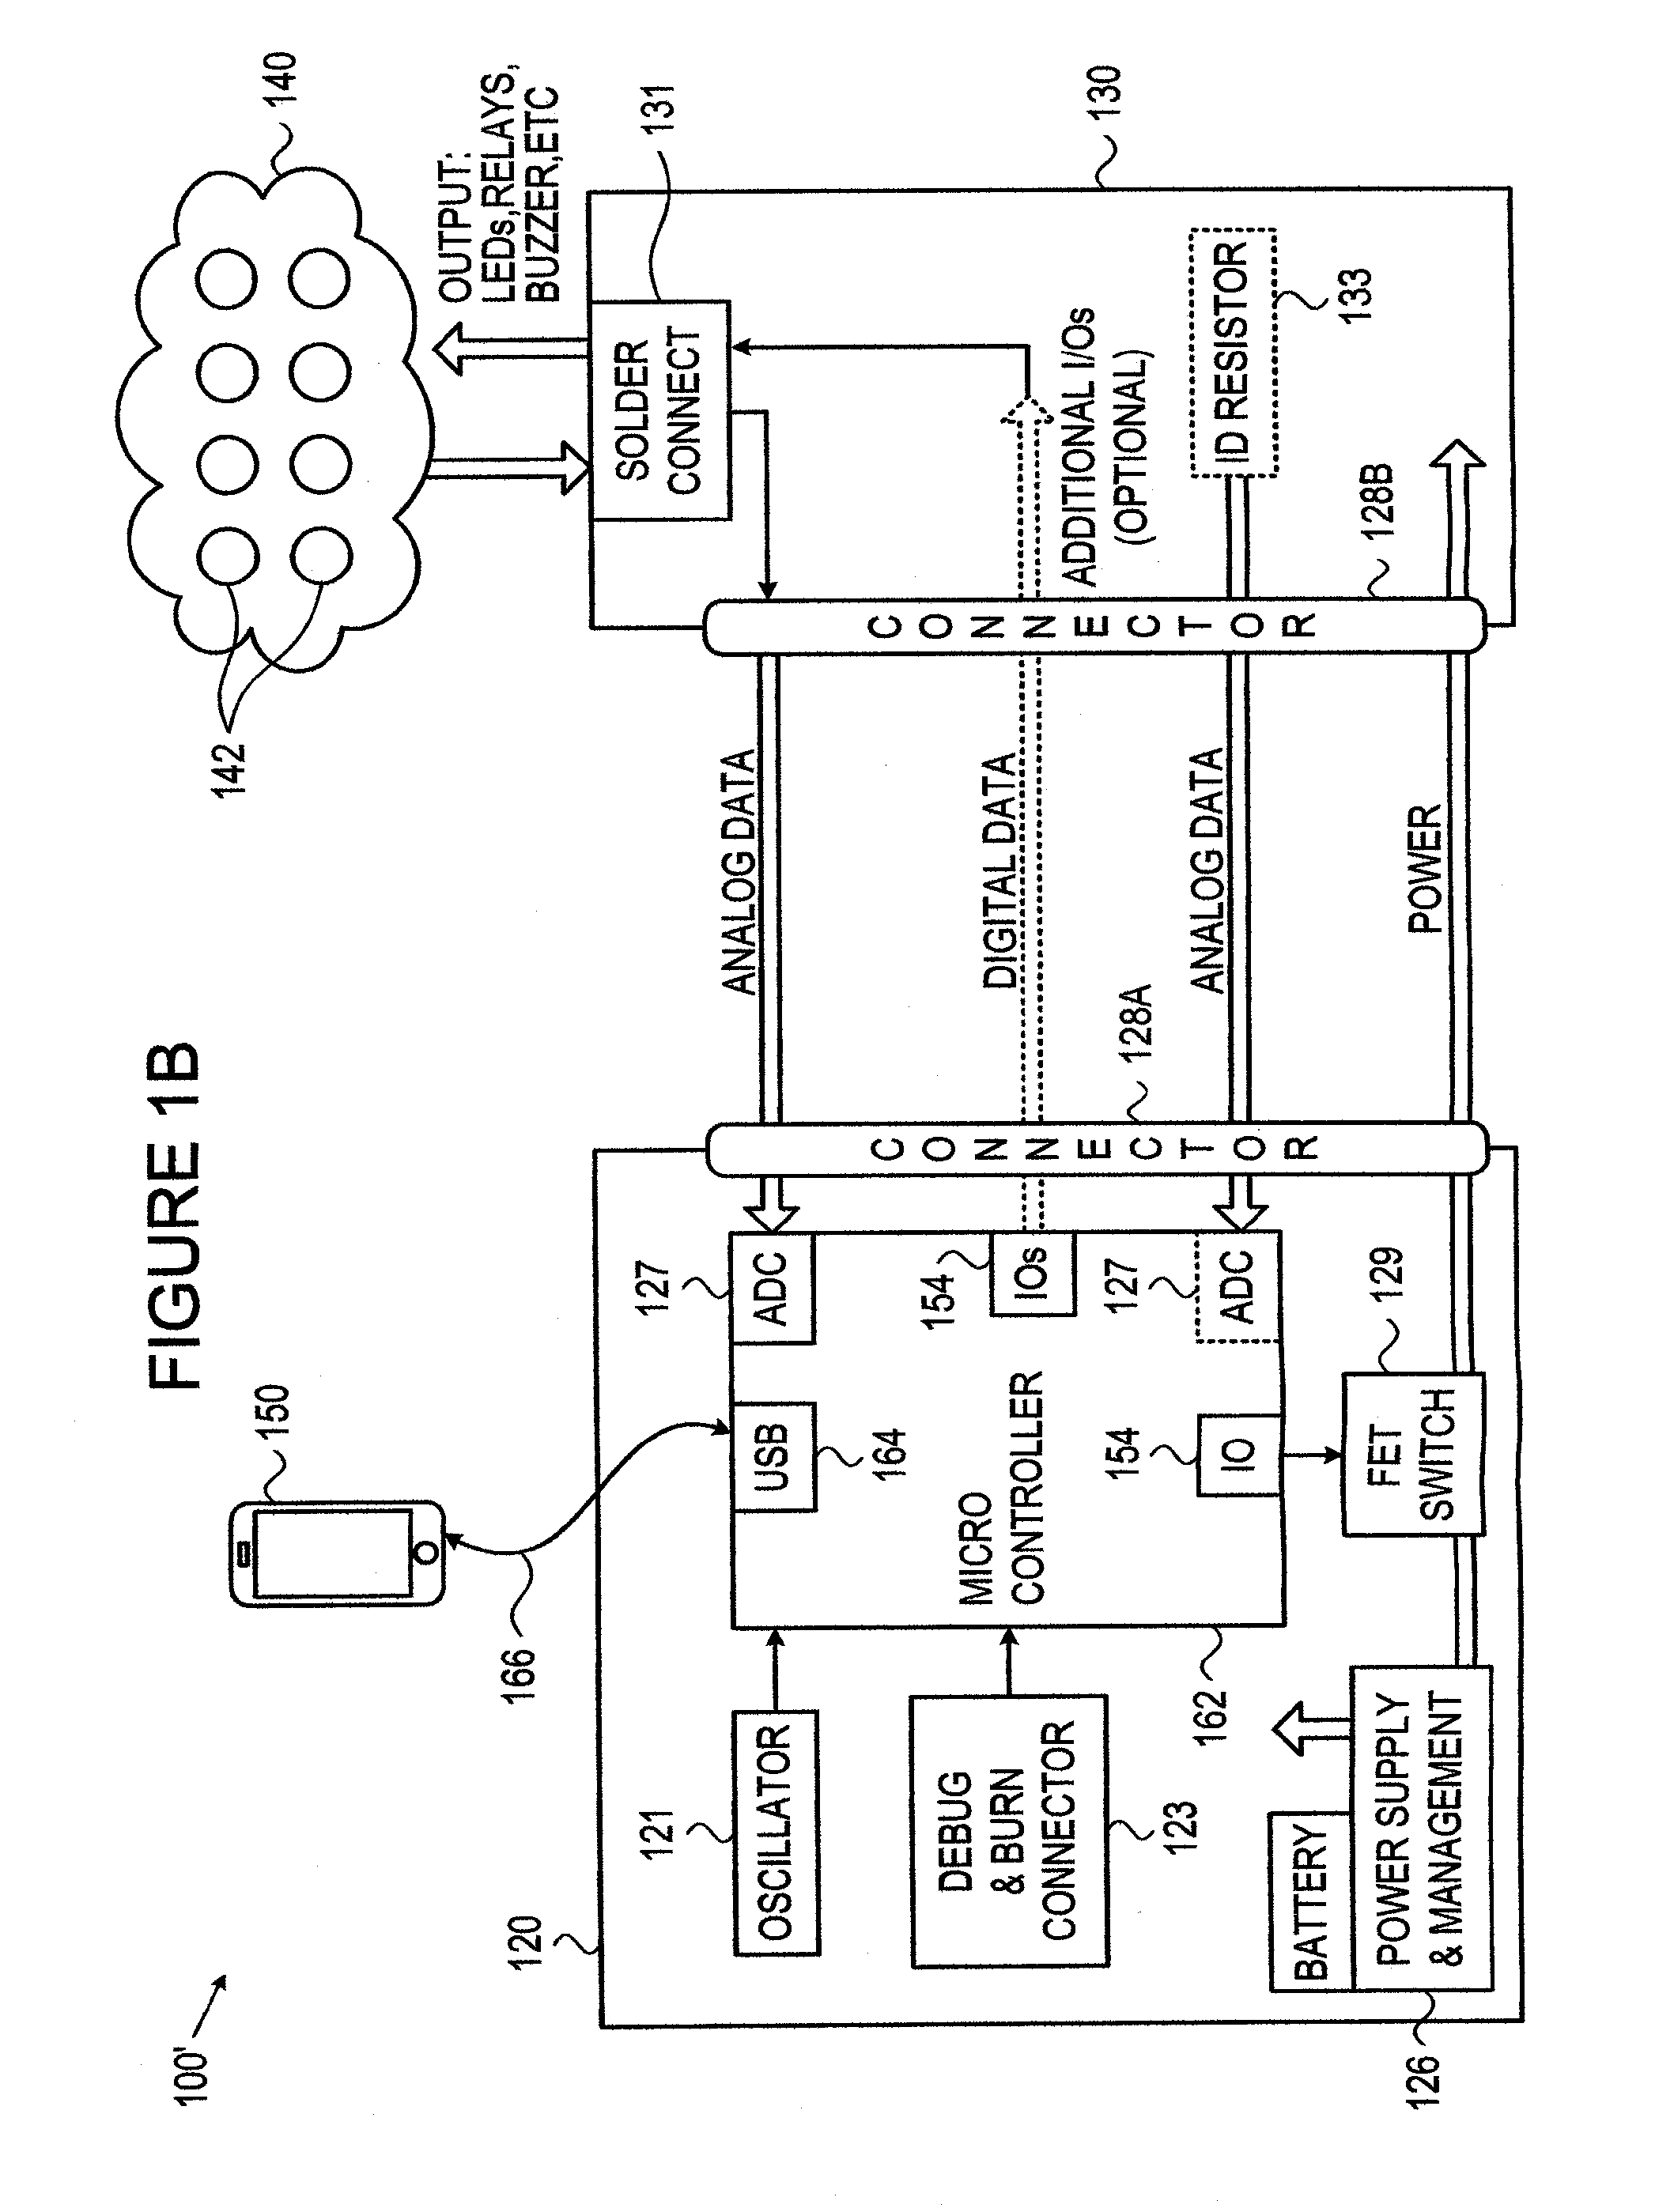 A novel toy console and methods of use